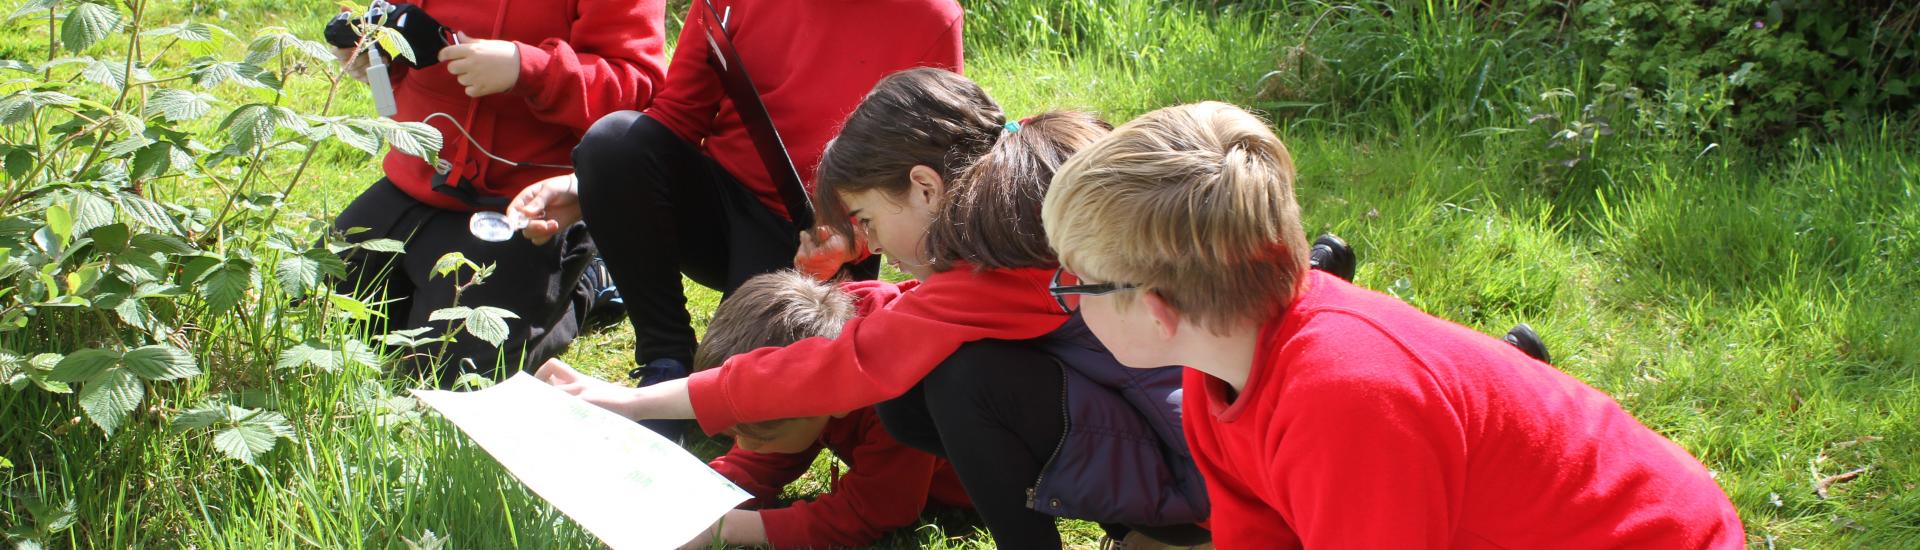 Another group of children crouched down in grass examining plants